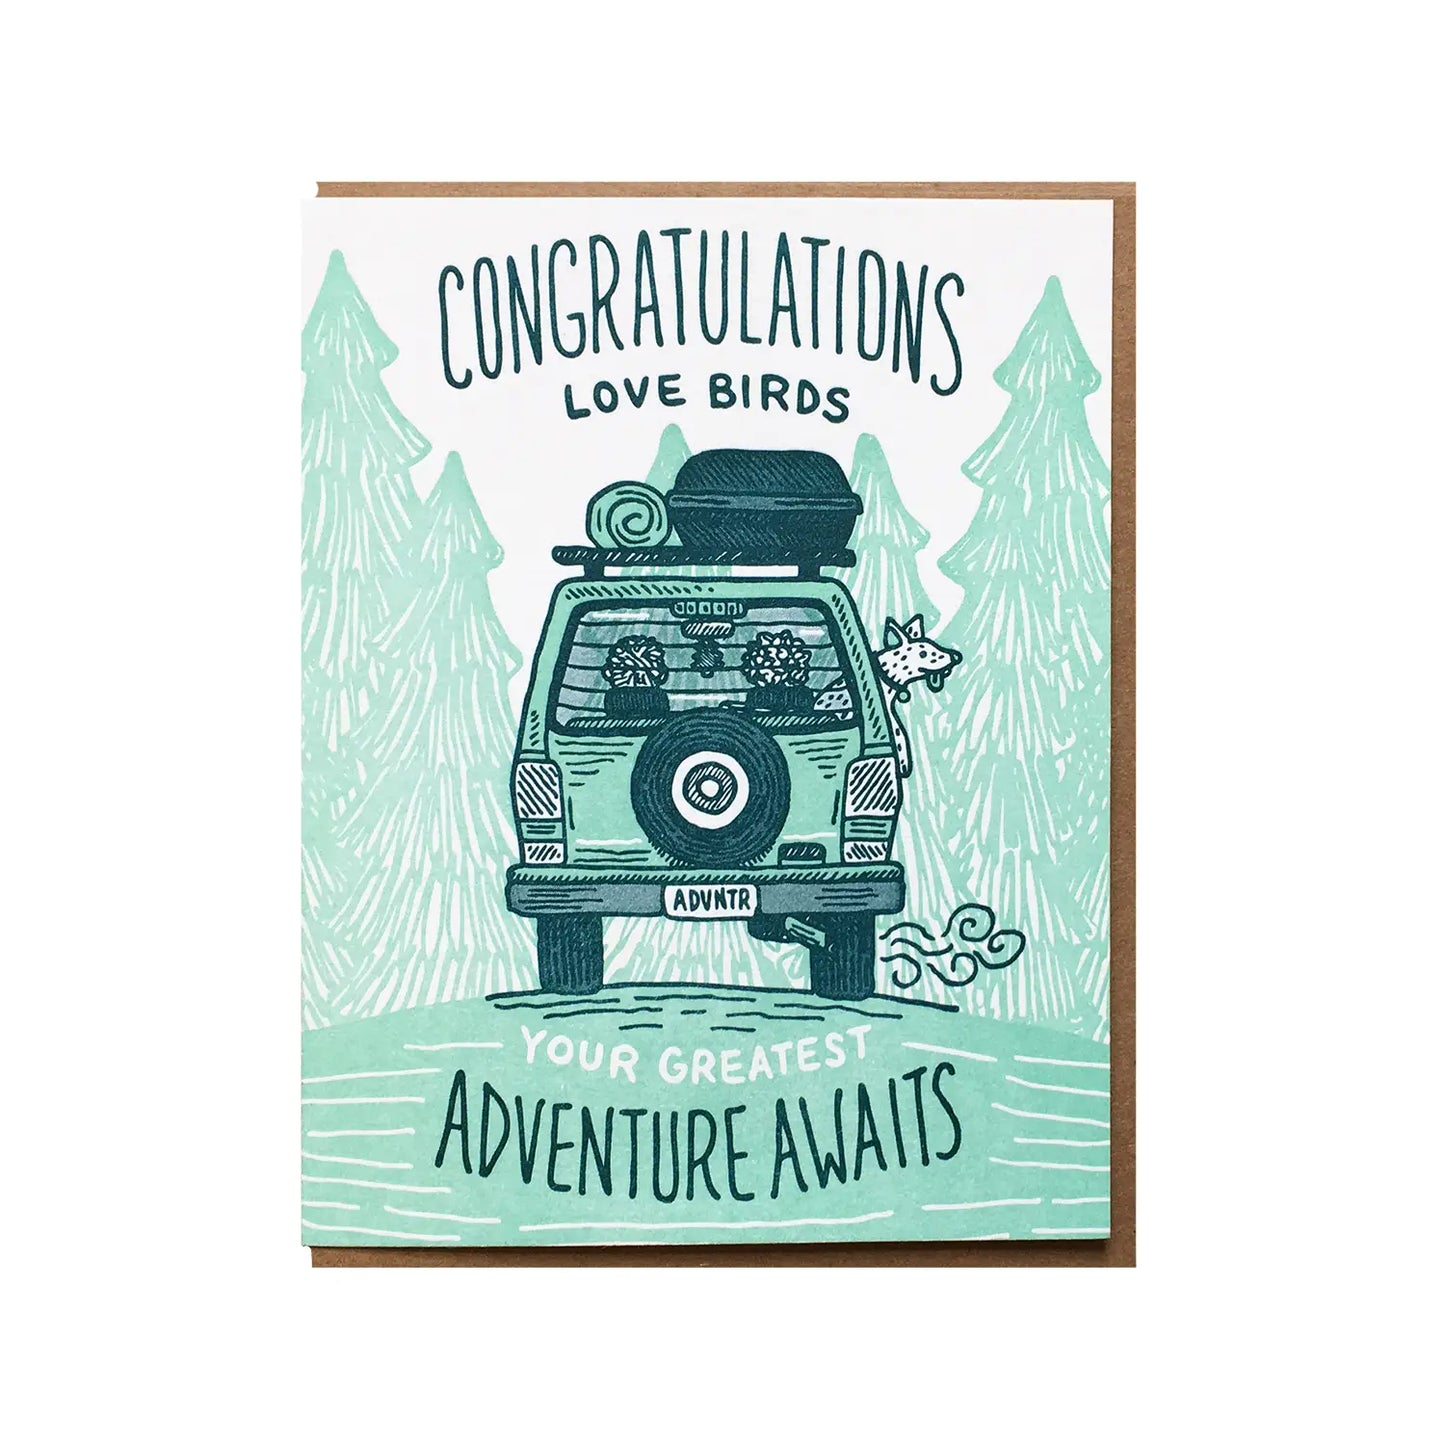 White card with illustrations of turqouise evergreen trees and a packed van with a dog's head sticking out the window. Navy text reads "Congratulations love birds, your greatest adventure awaits 